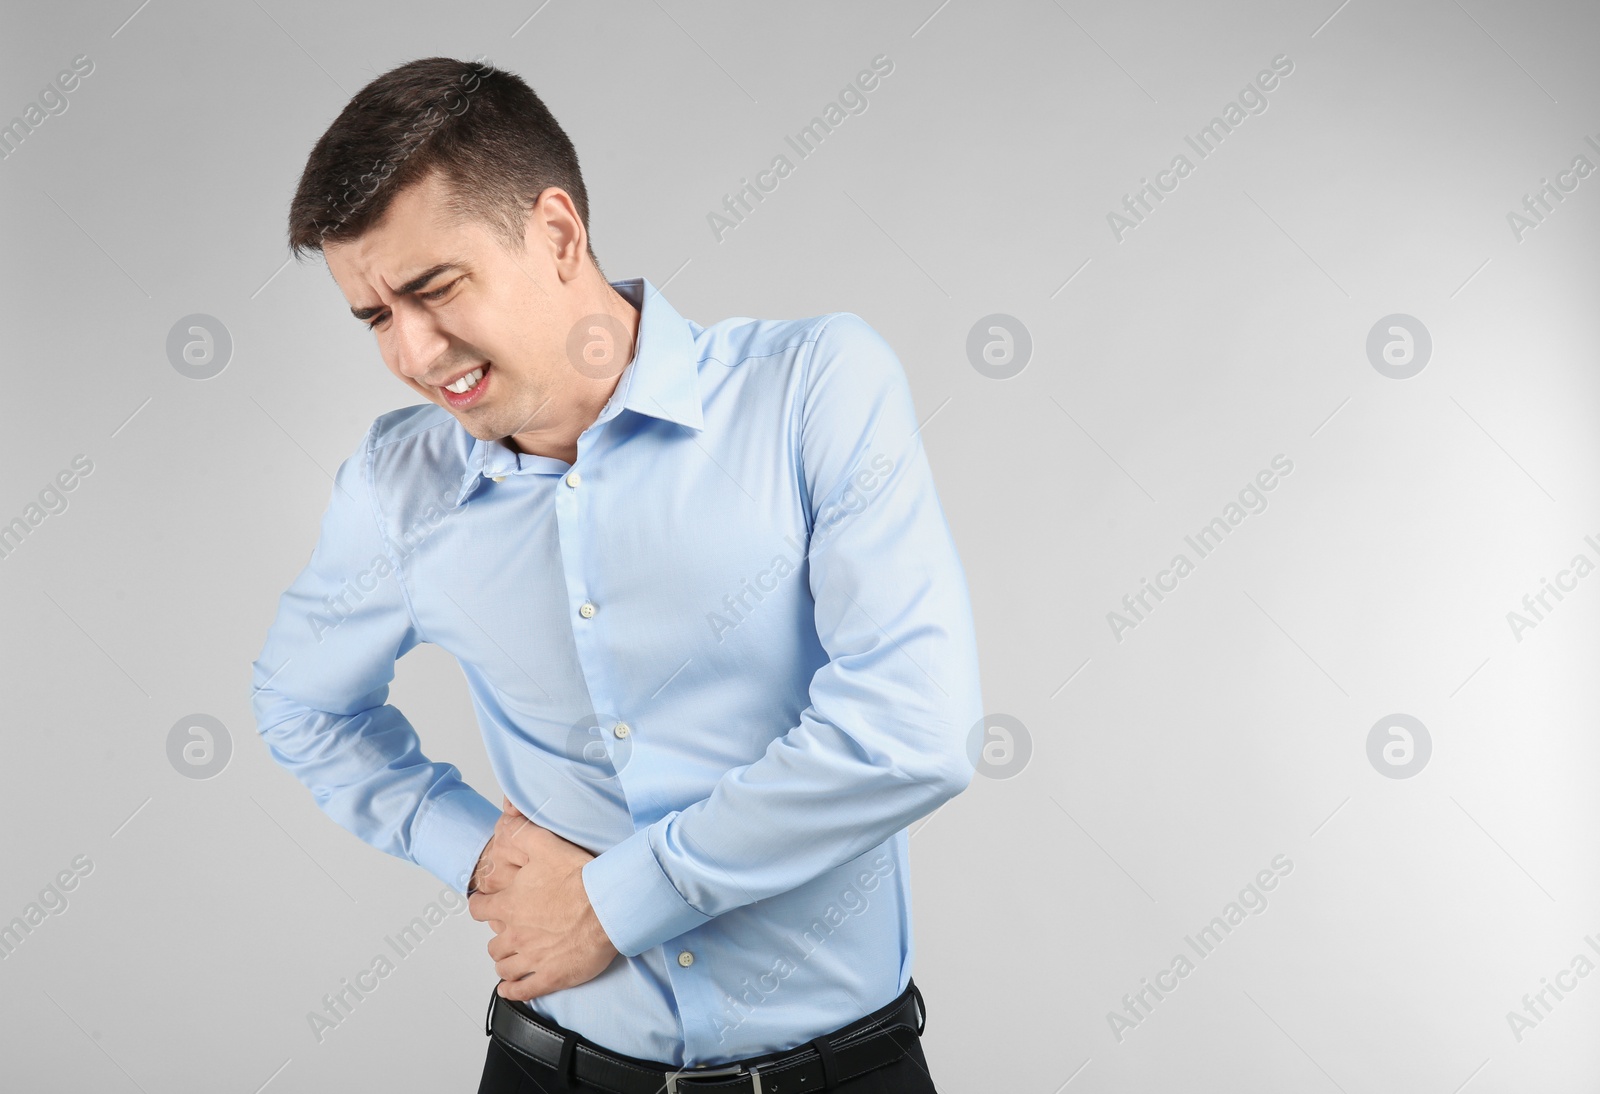 Photo of Young man suffering from flank pain on light background